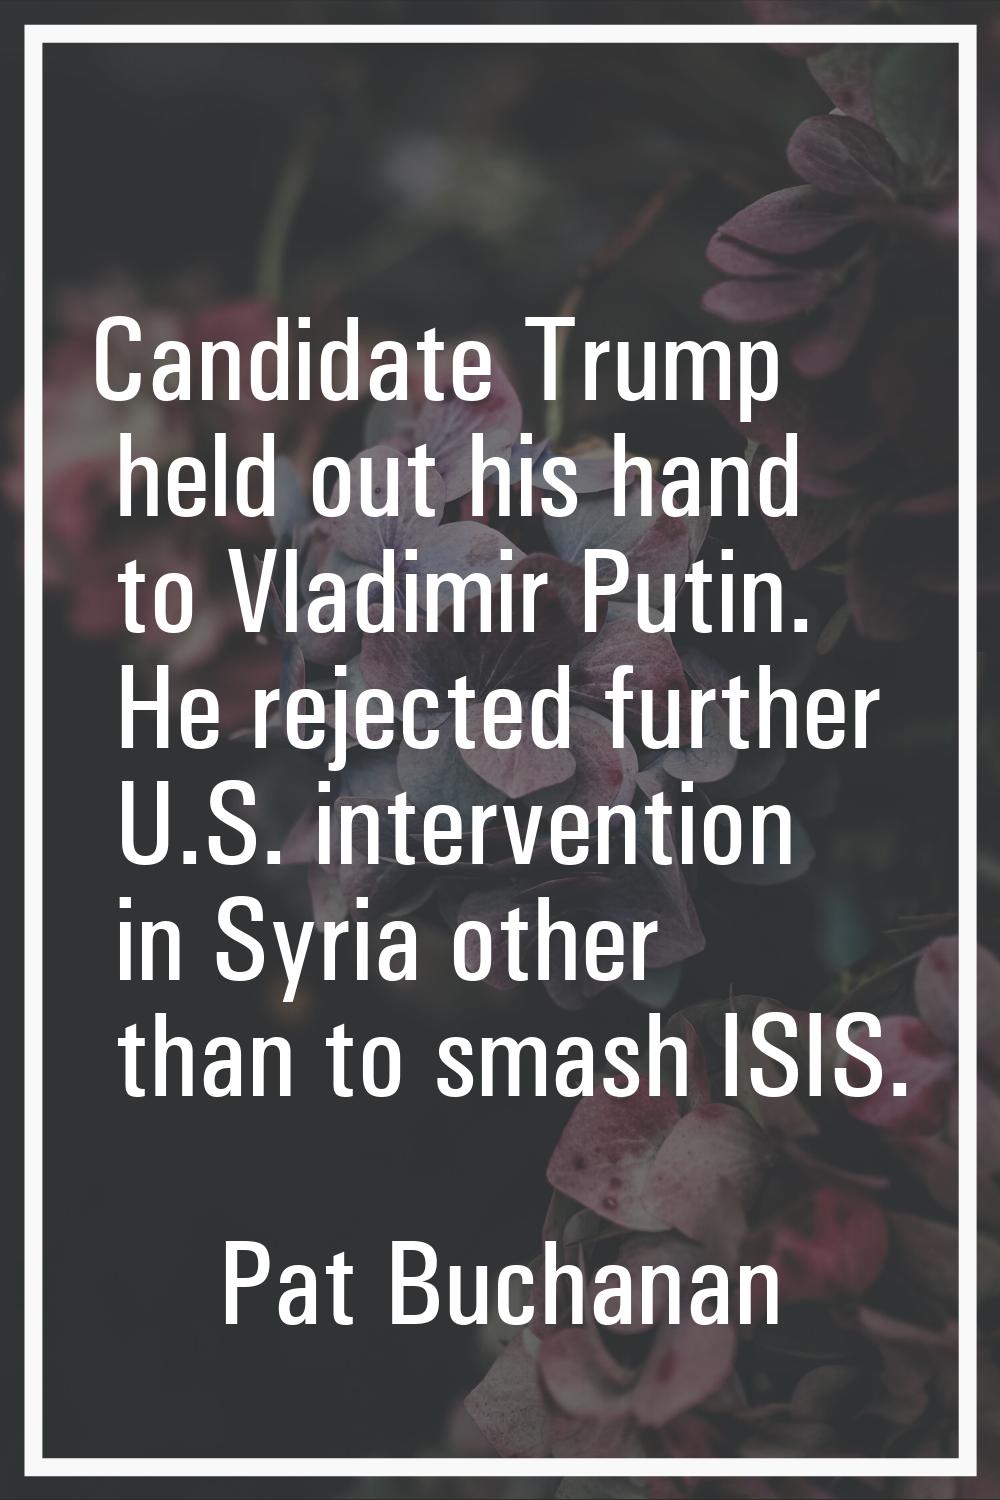 Candidate Trump held out his hand to Vladimir Putin. He rejected further U.S. intervention in Syria